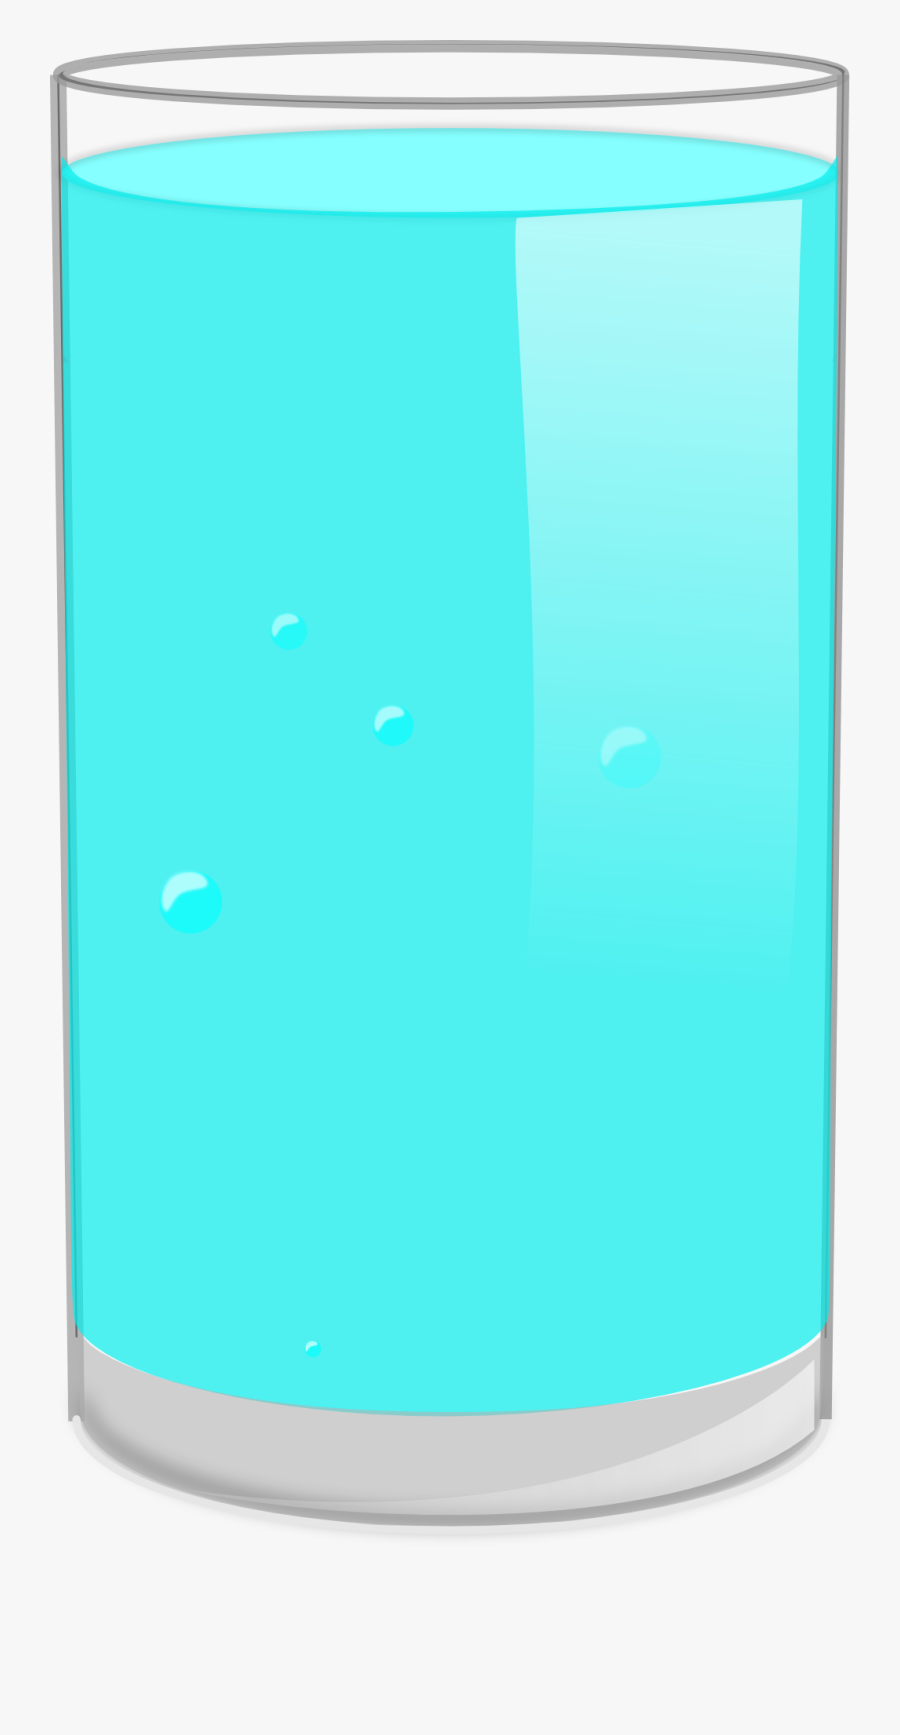 Clip Art Cup Of Water Clipart - Full Cup Of Water, Transparent Clipart